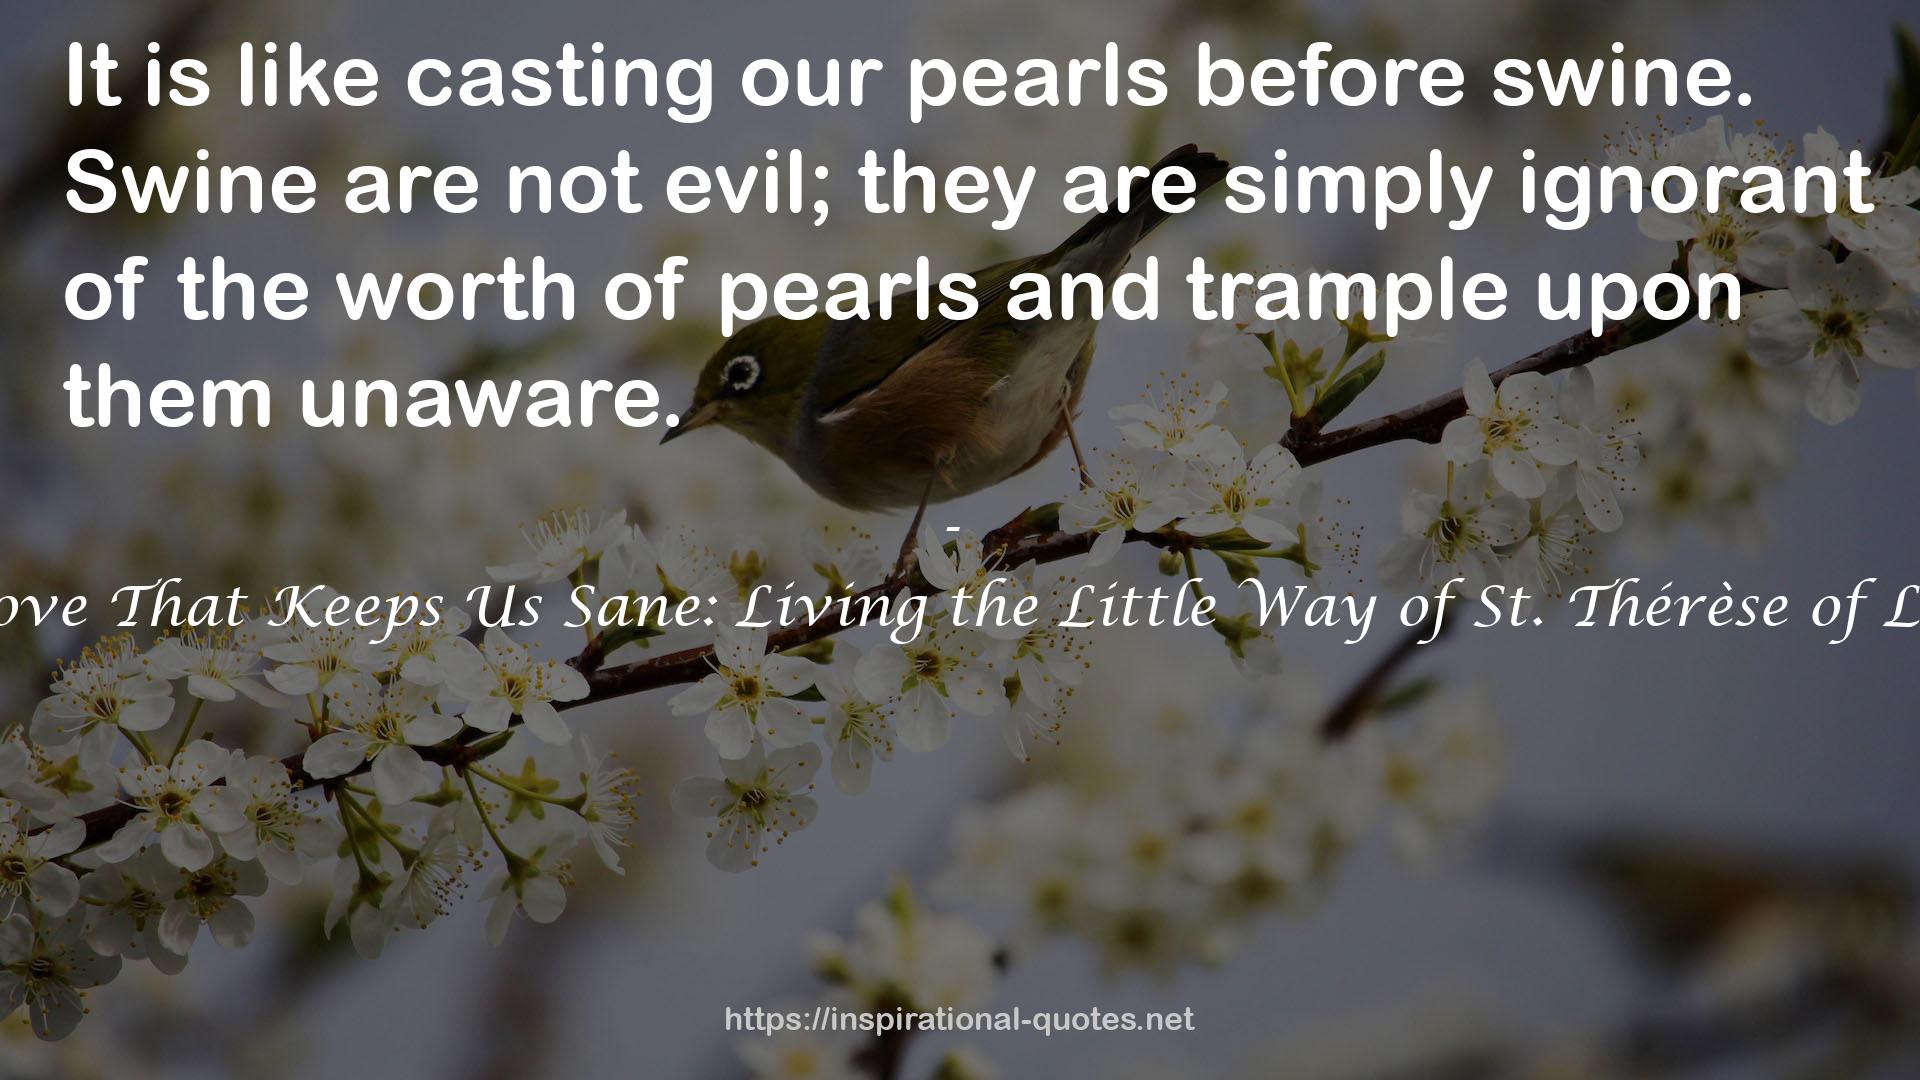 The Love That Keeps Us Sane: Living the Little Way of St. Thérèse of Lisieux QUOTES